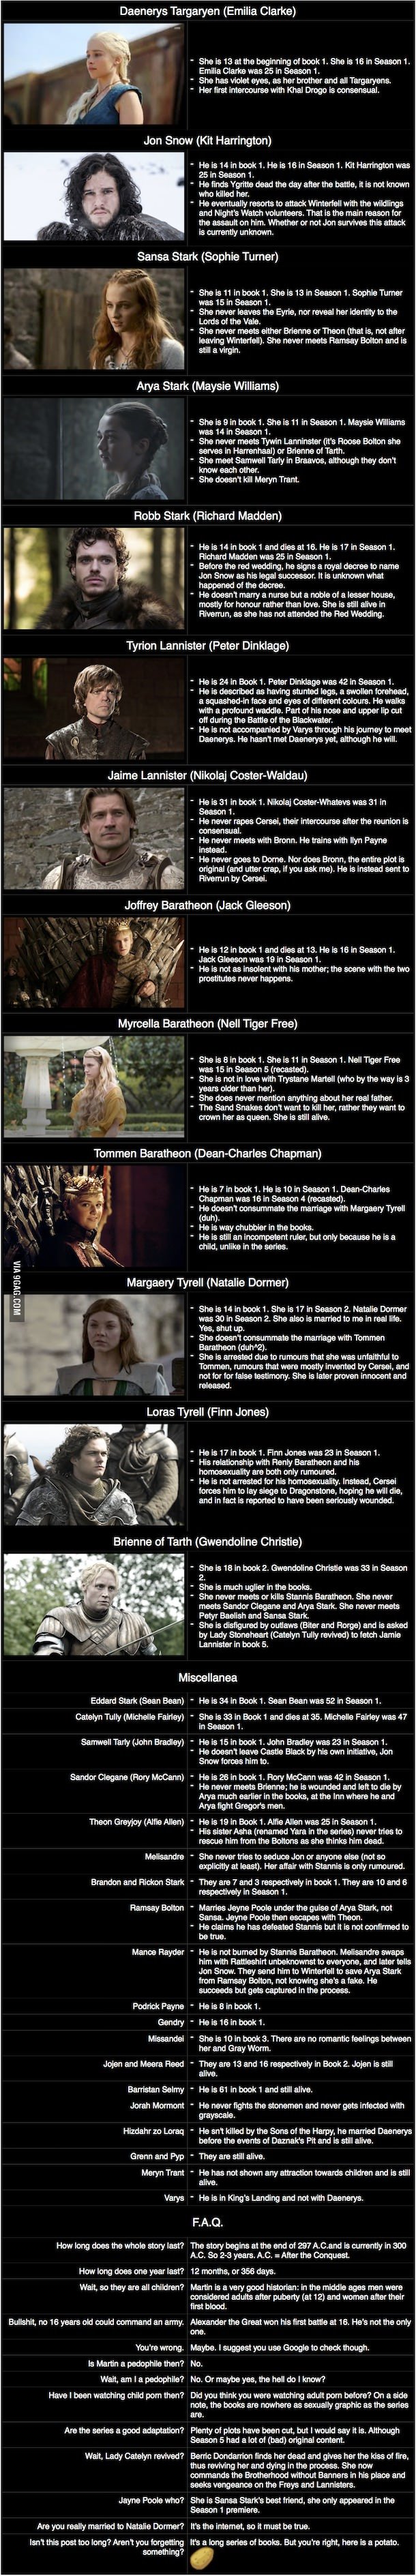 a game of thrones book list